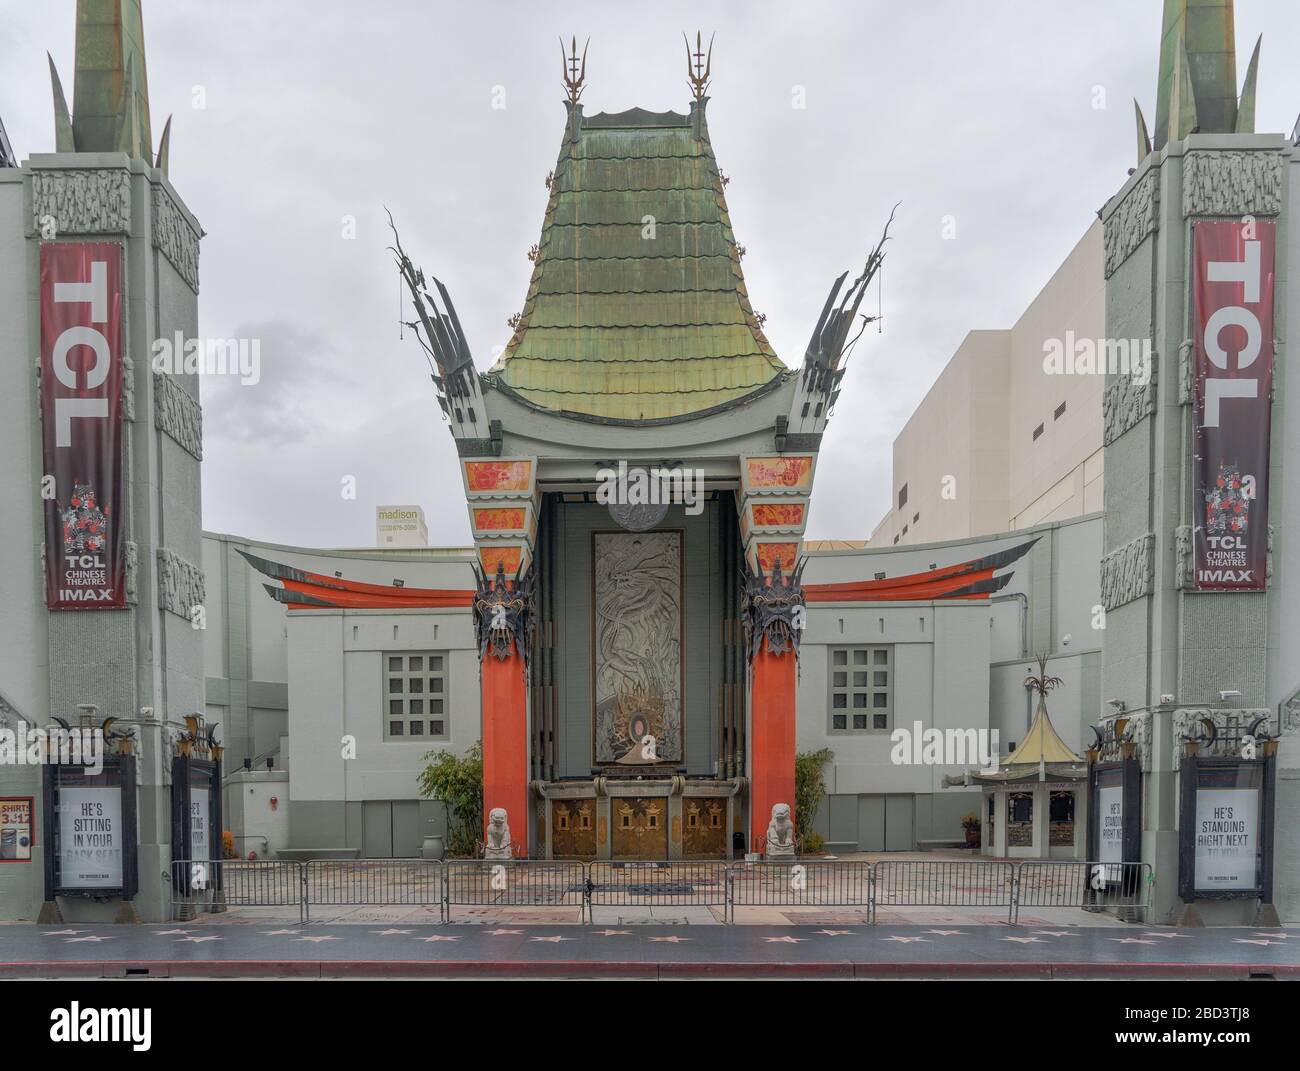 There are no tourists walking in front of Hollywood's famous Chinese Theater along Hollywood Boulevard's Walk of Fame during the April 2020 Covid19 social-distancing campaign in the city. It is normally packed with travellers from around the world who come to see the celebrity hand and footprints set in cement in front of the famous landmark. Stock Photo